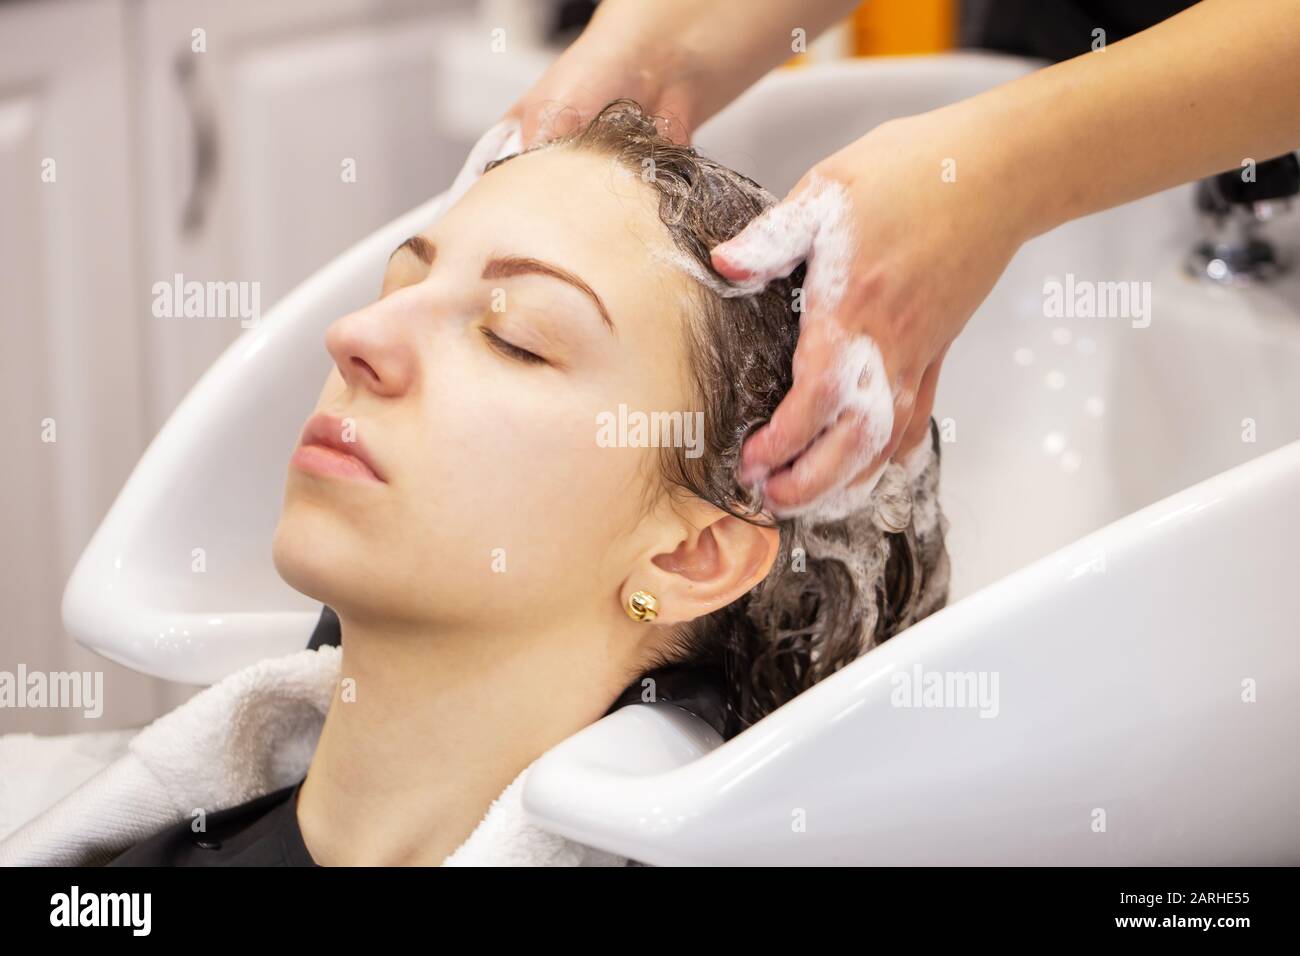 Hair washing at the hairdresser. Woman with closed eyes washes hair in the  bath Stock Photo - Alamy